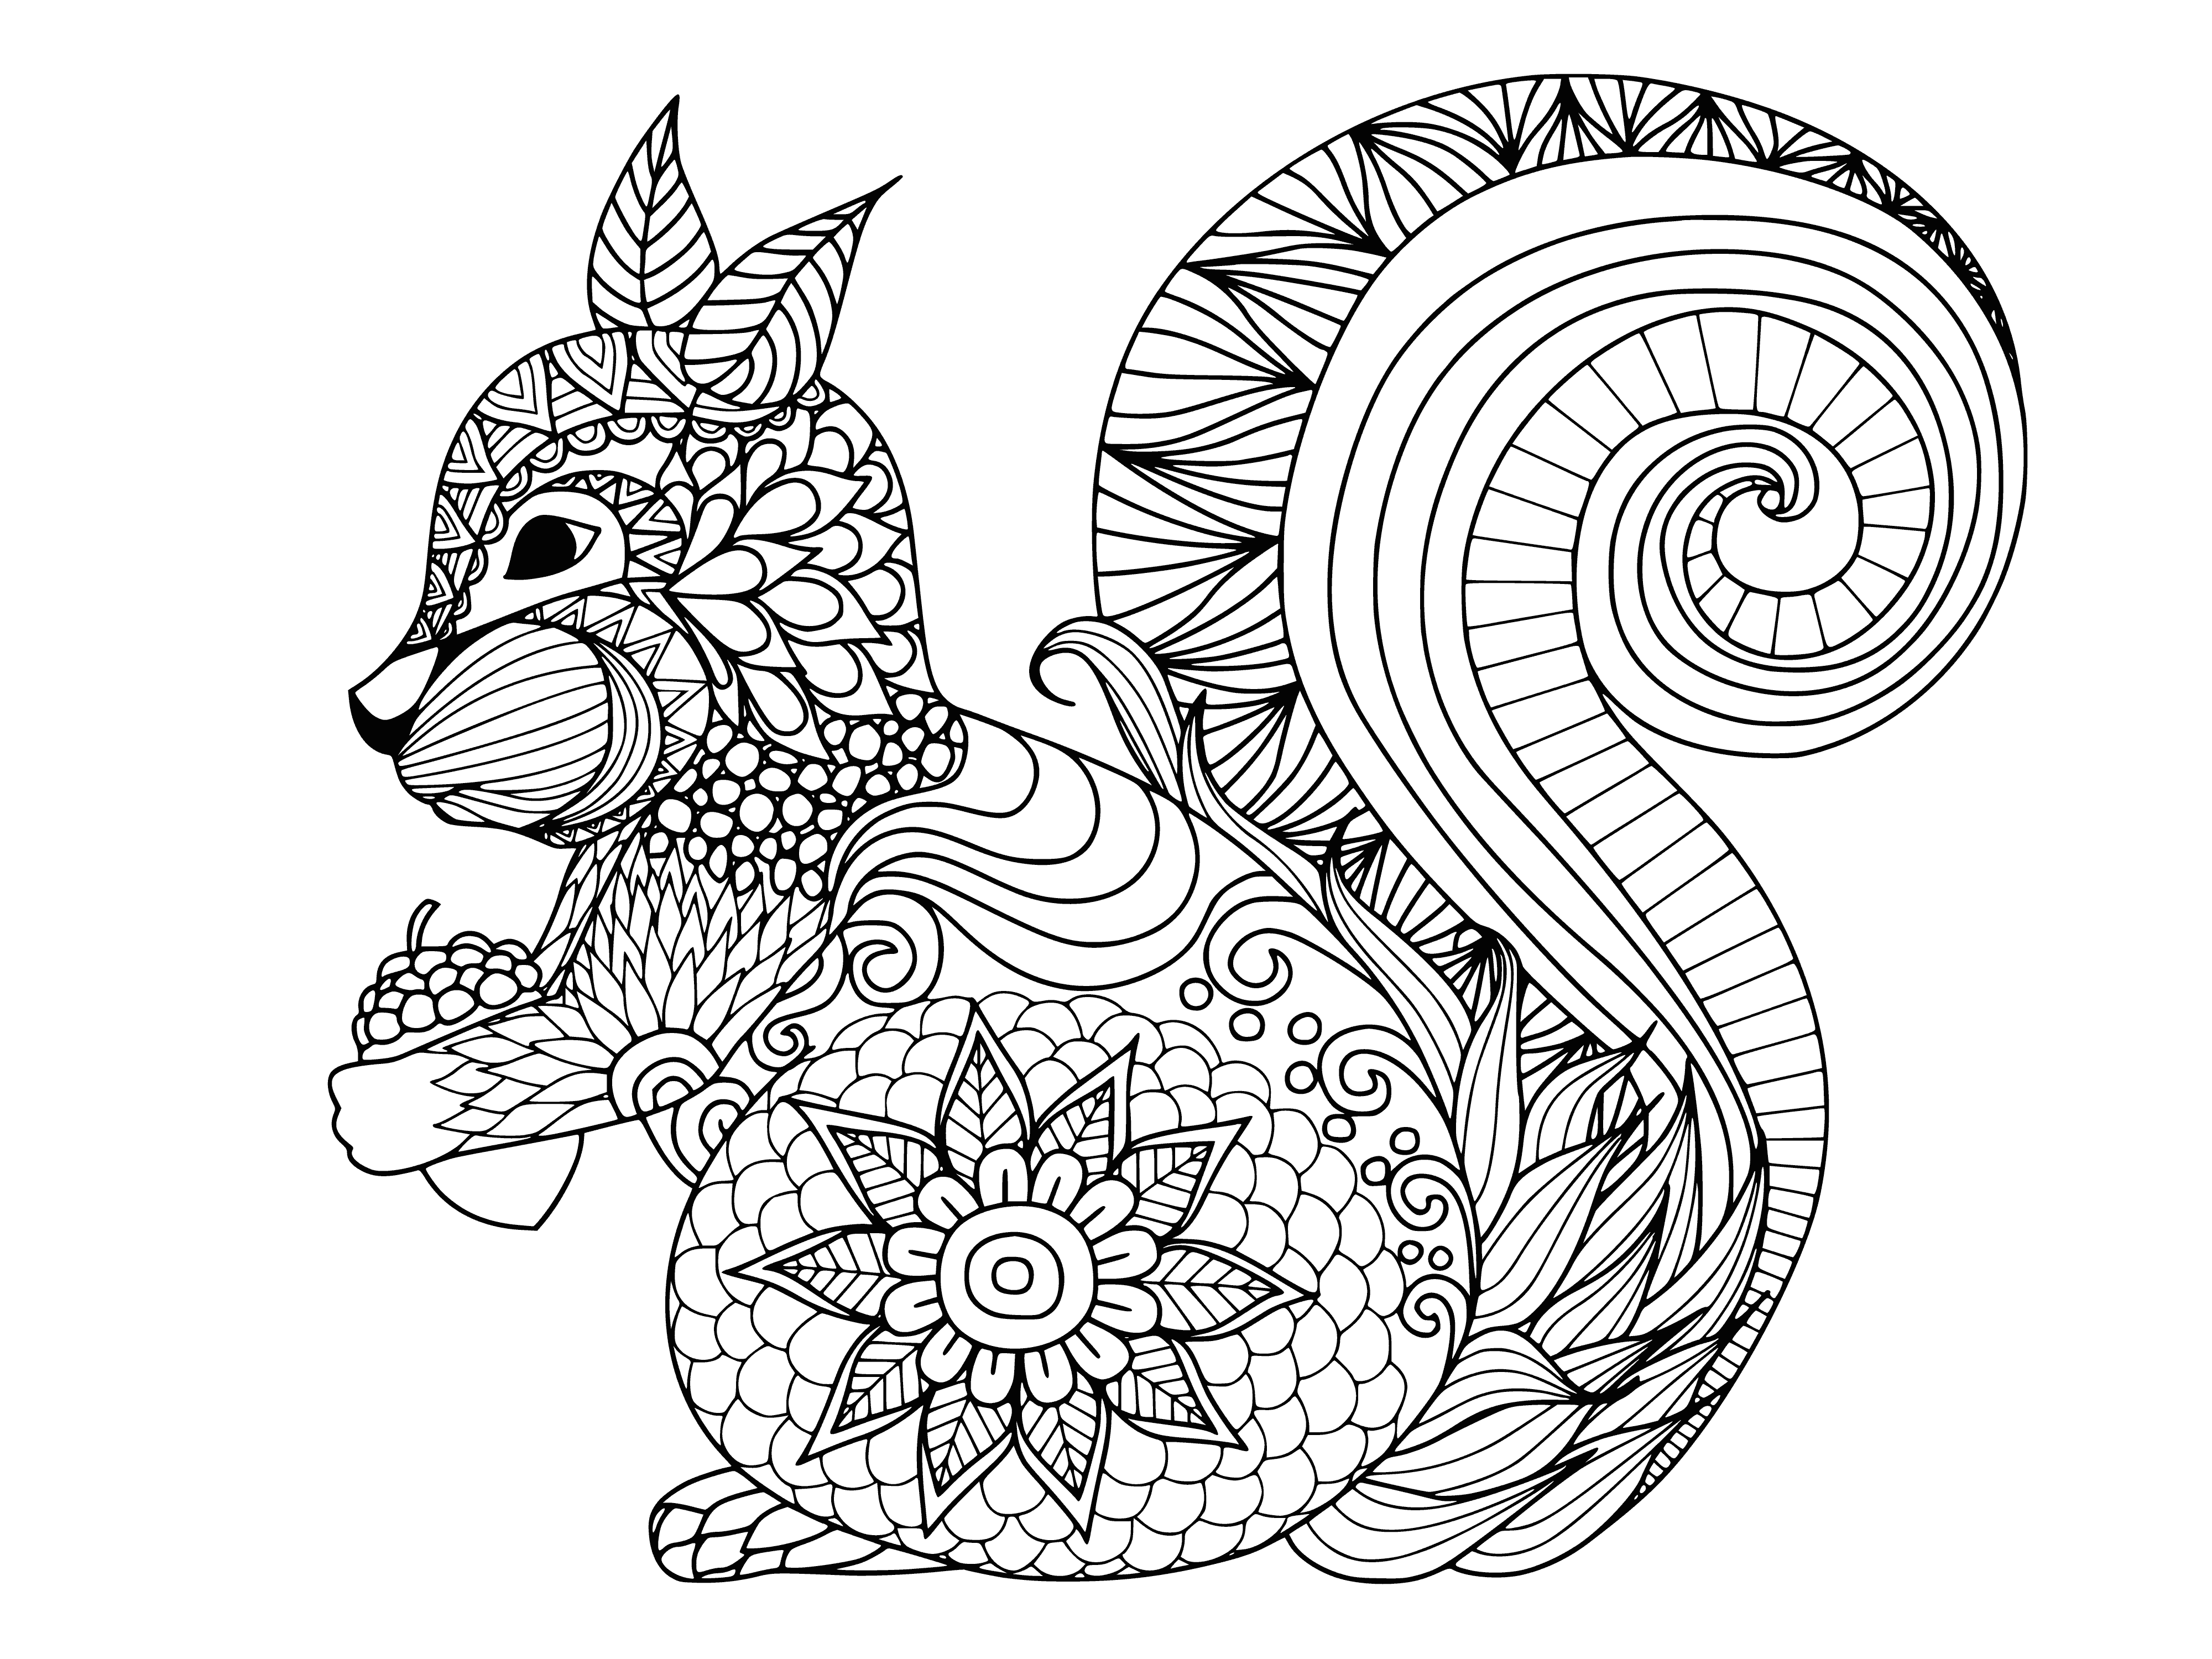 coloring page: Squirrel snoozing on branch against swirl of greens and browns.